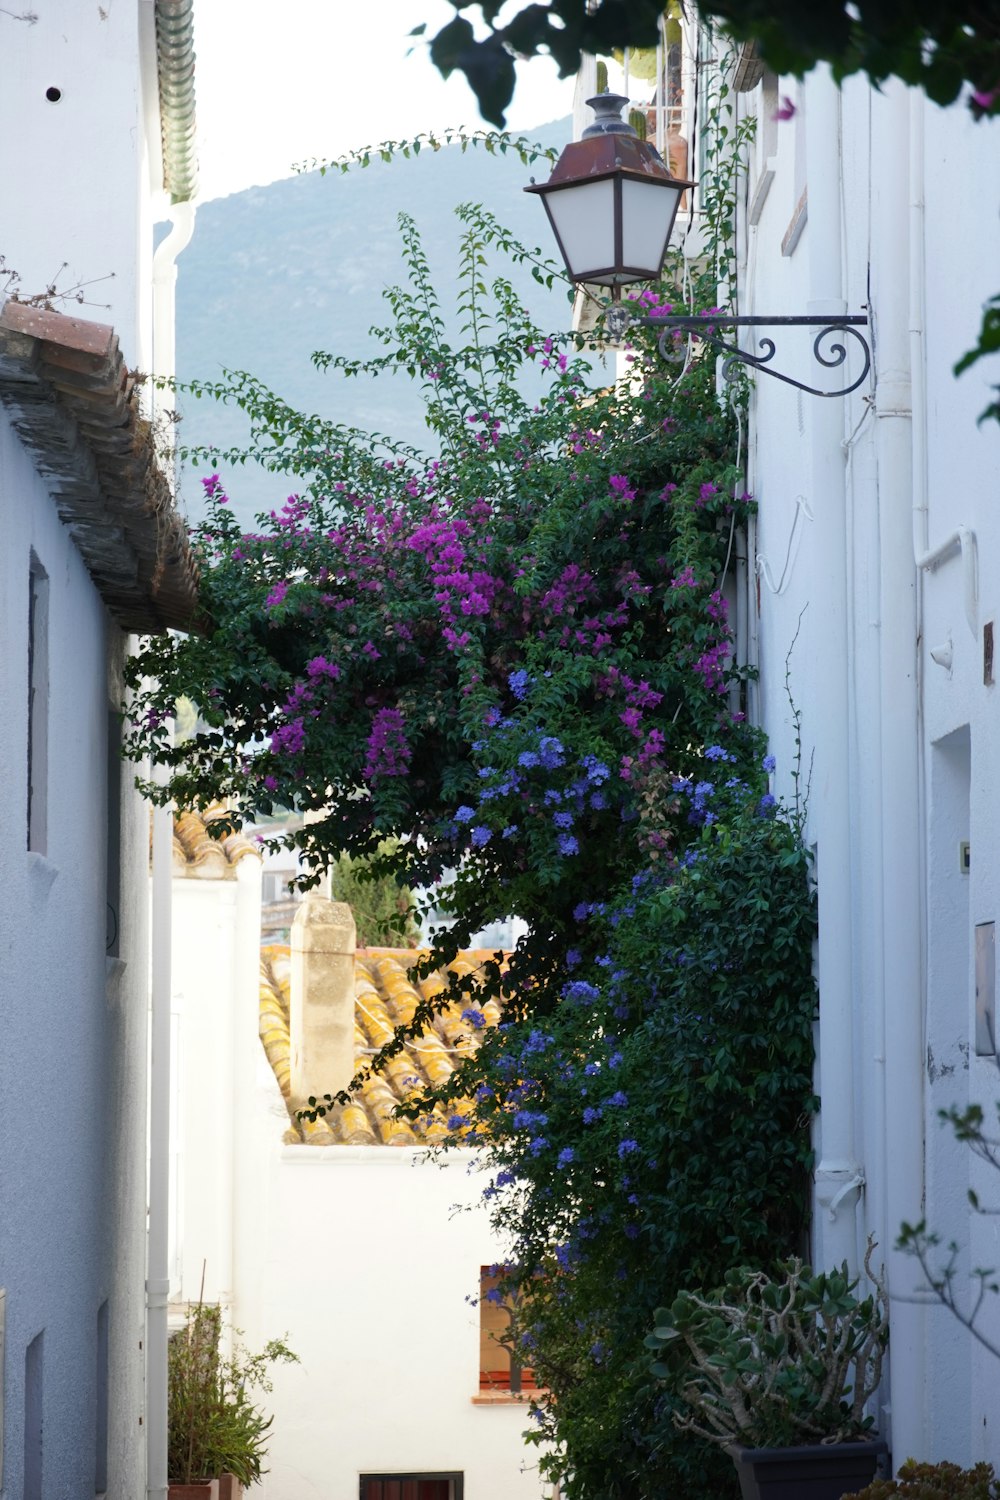 a narrow alleyway with a lamp post and flowers growing on it